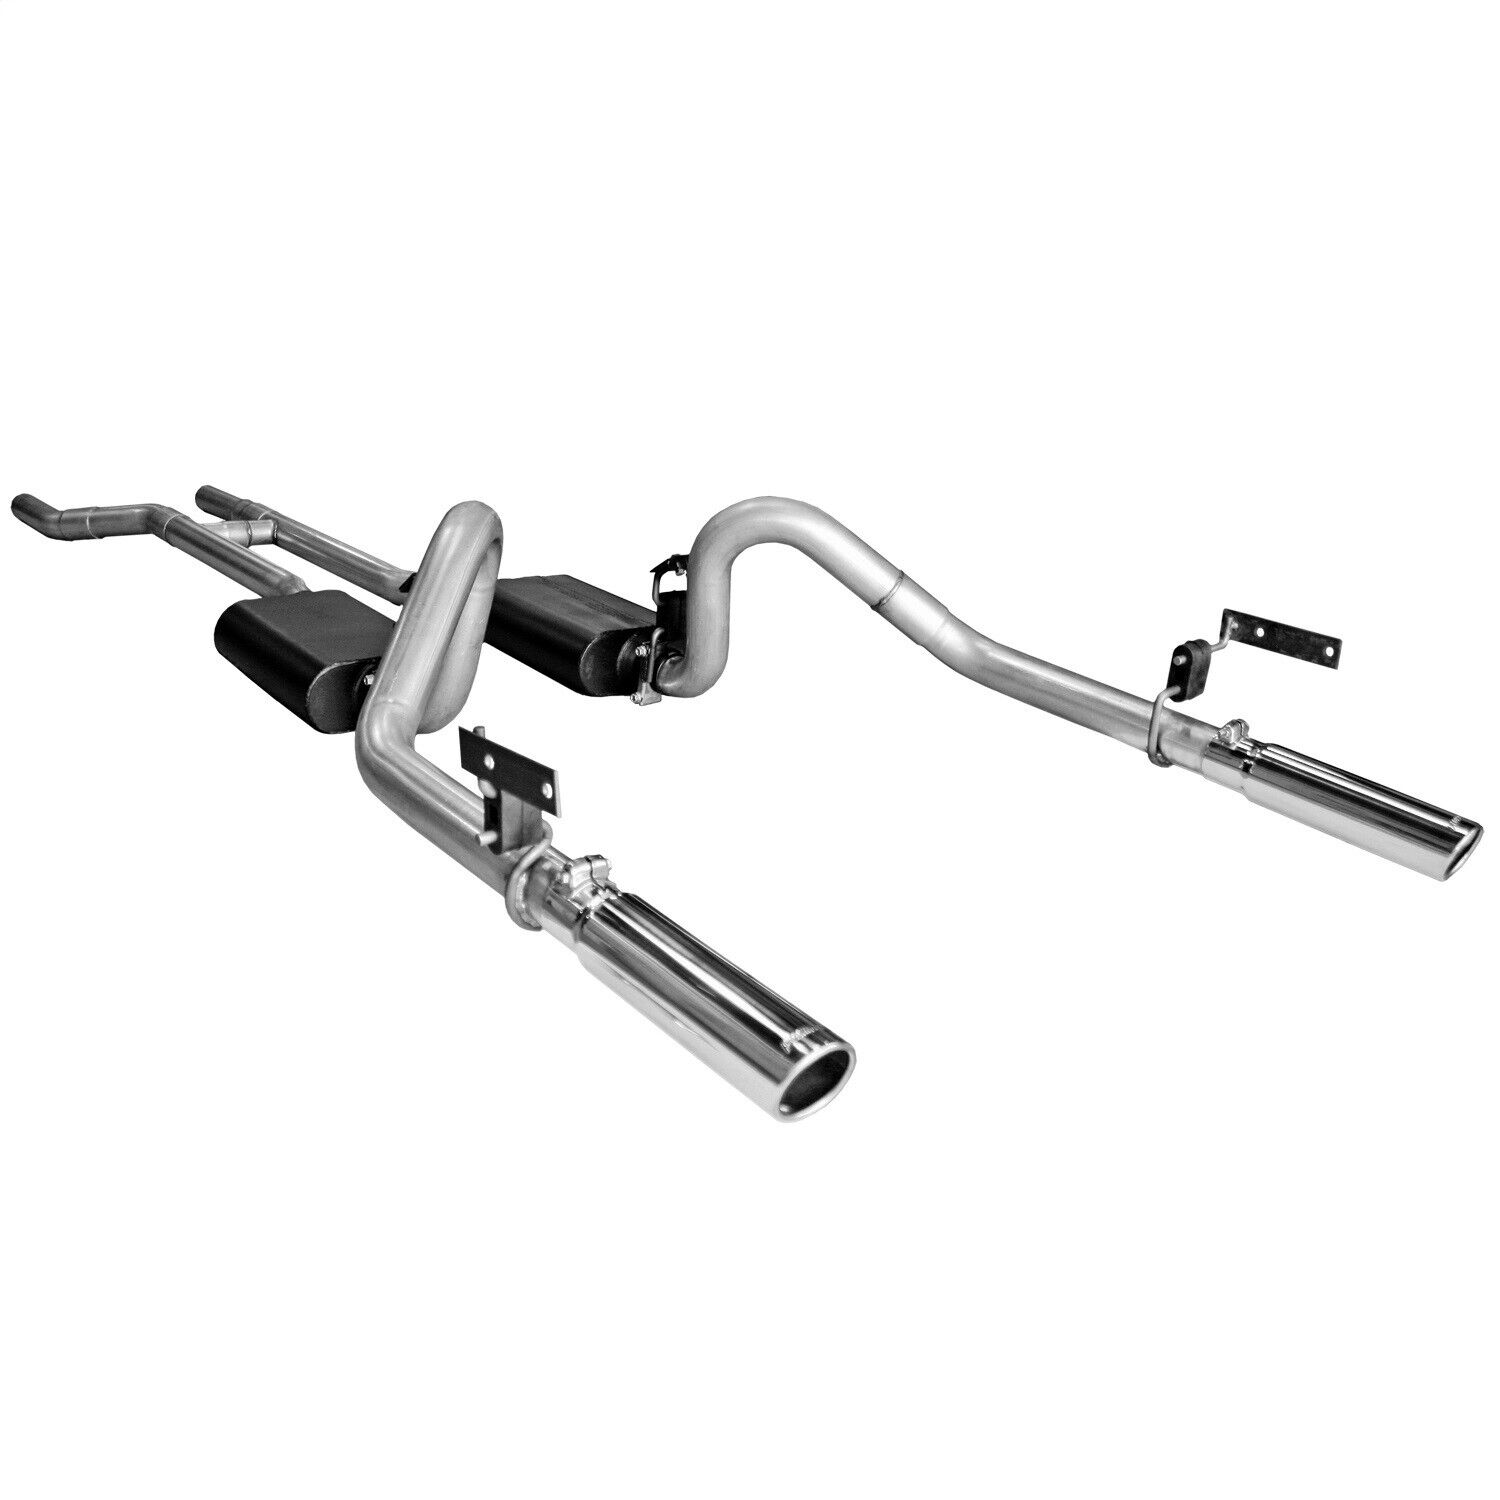 Flowmaster 17281 American Thunder Downpipe Back Exhaust System Fits Mustang